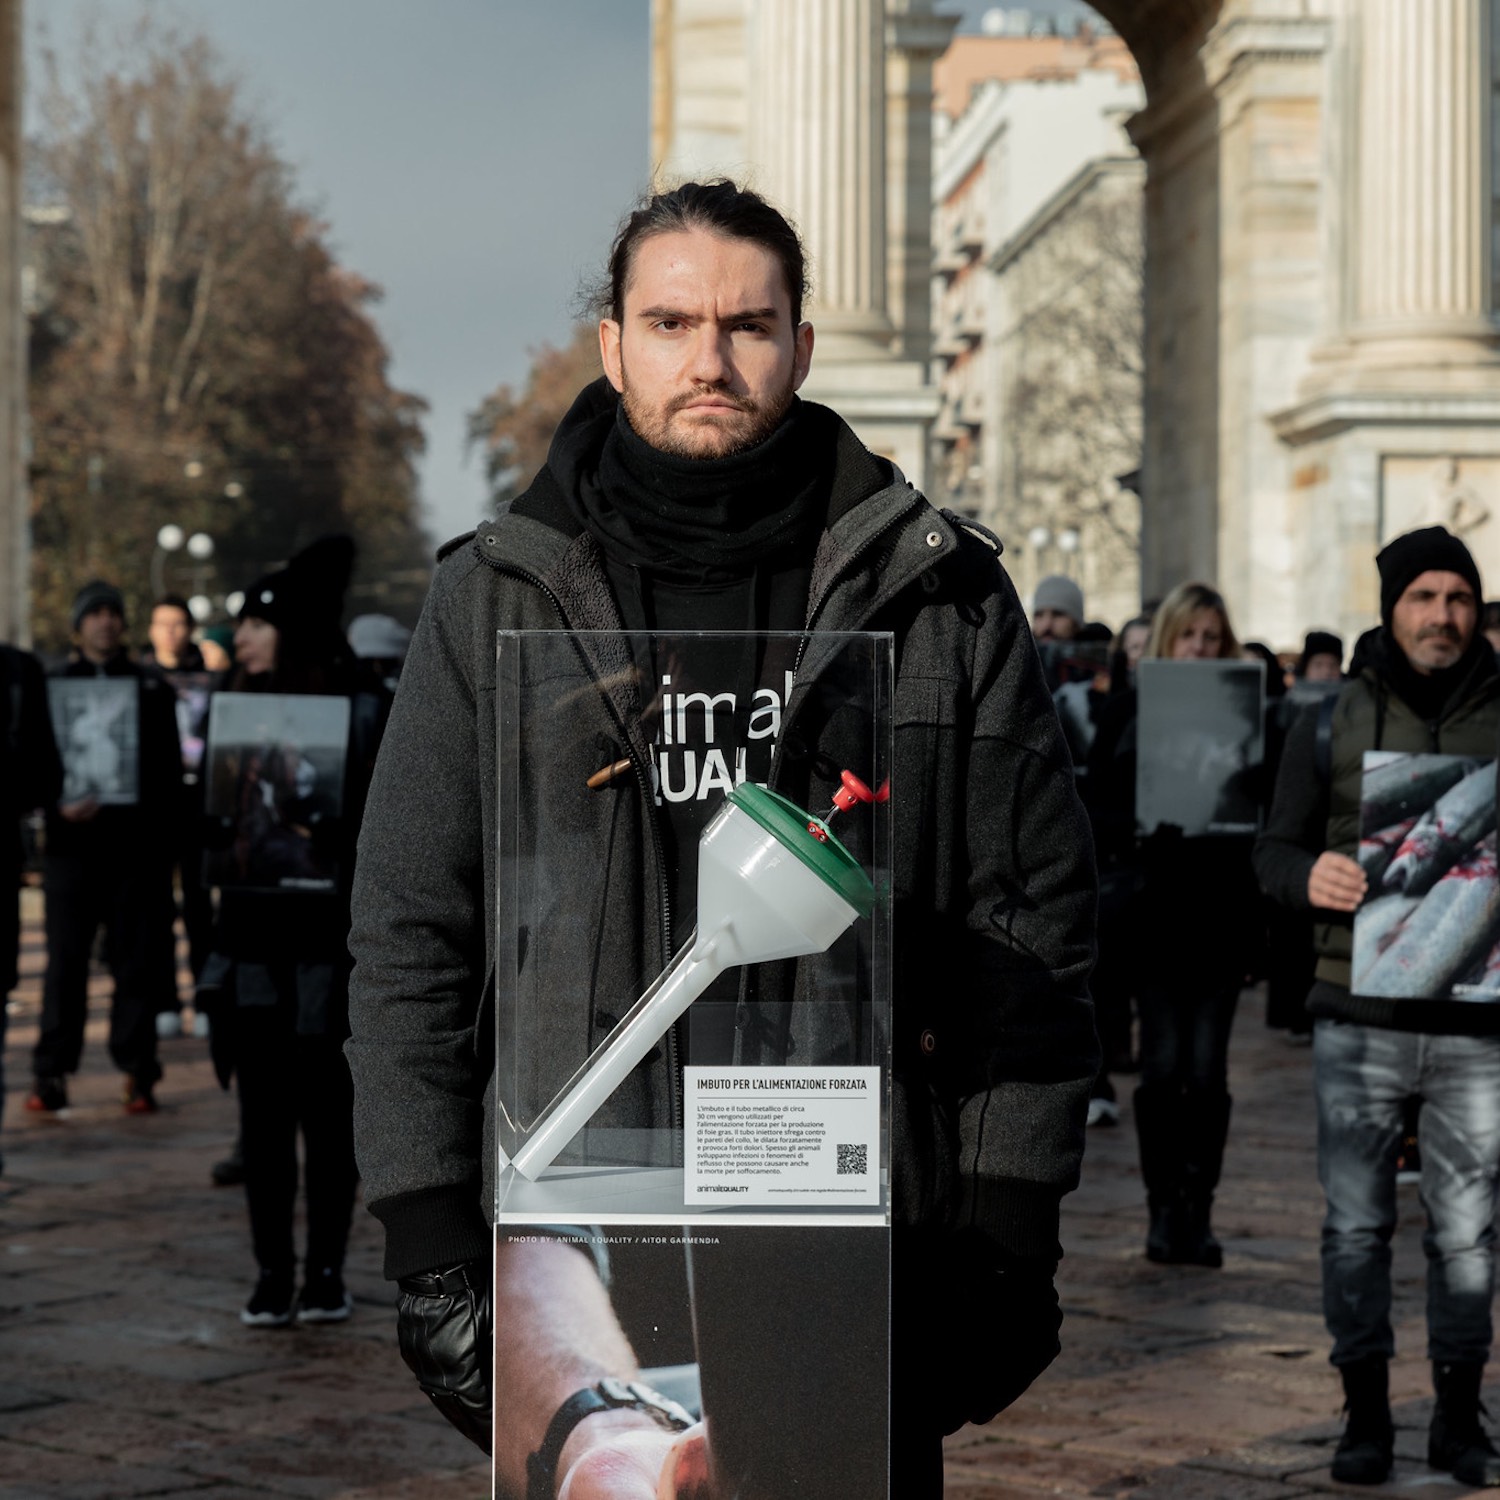 Volunteer looking at the camera during International Animal Rights Day protest in Italy